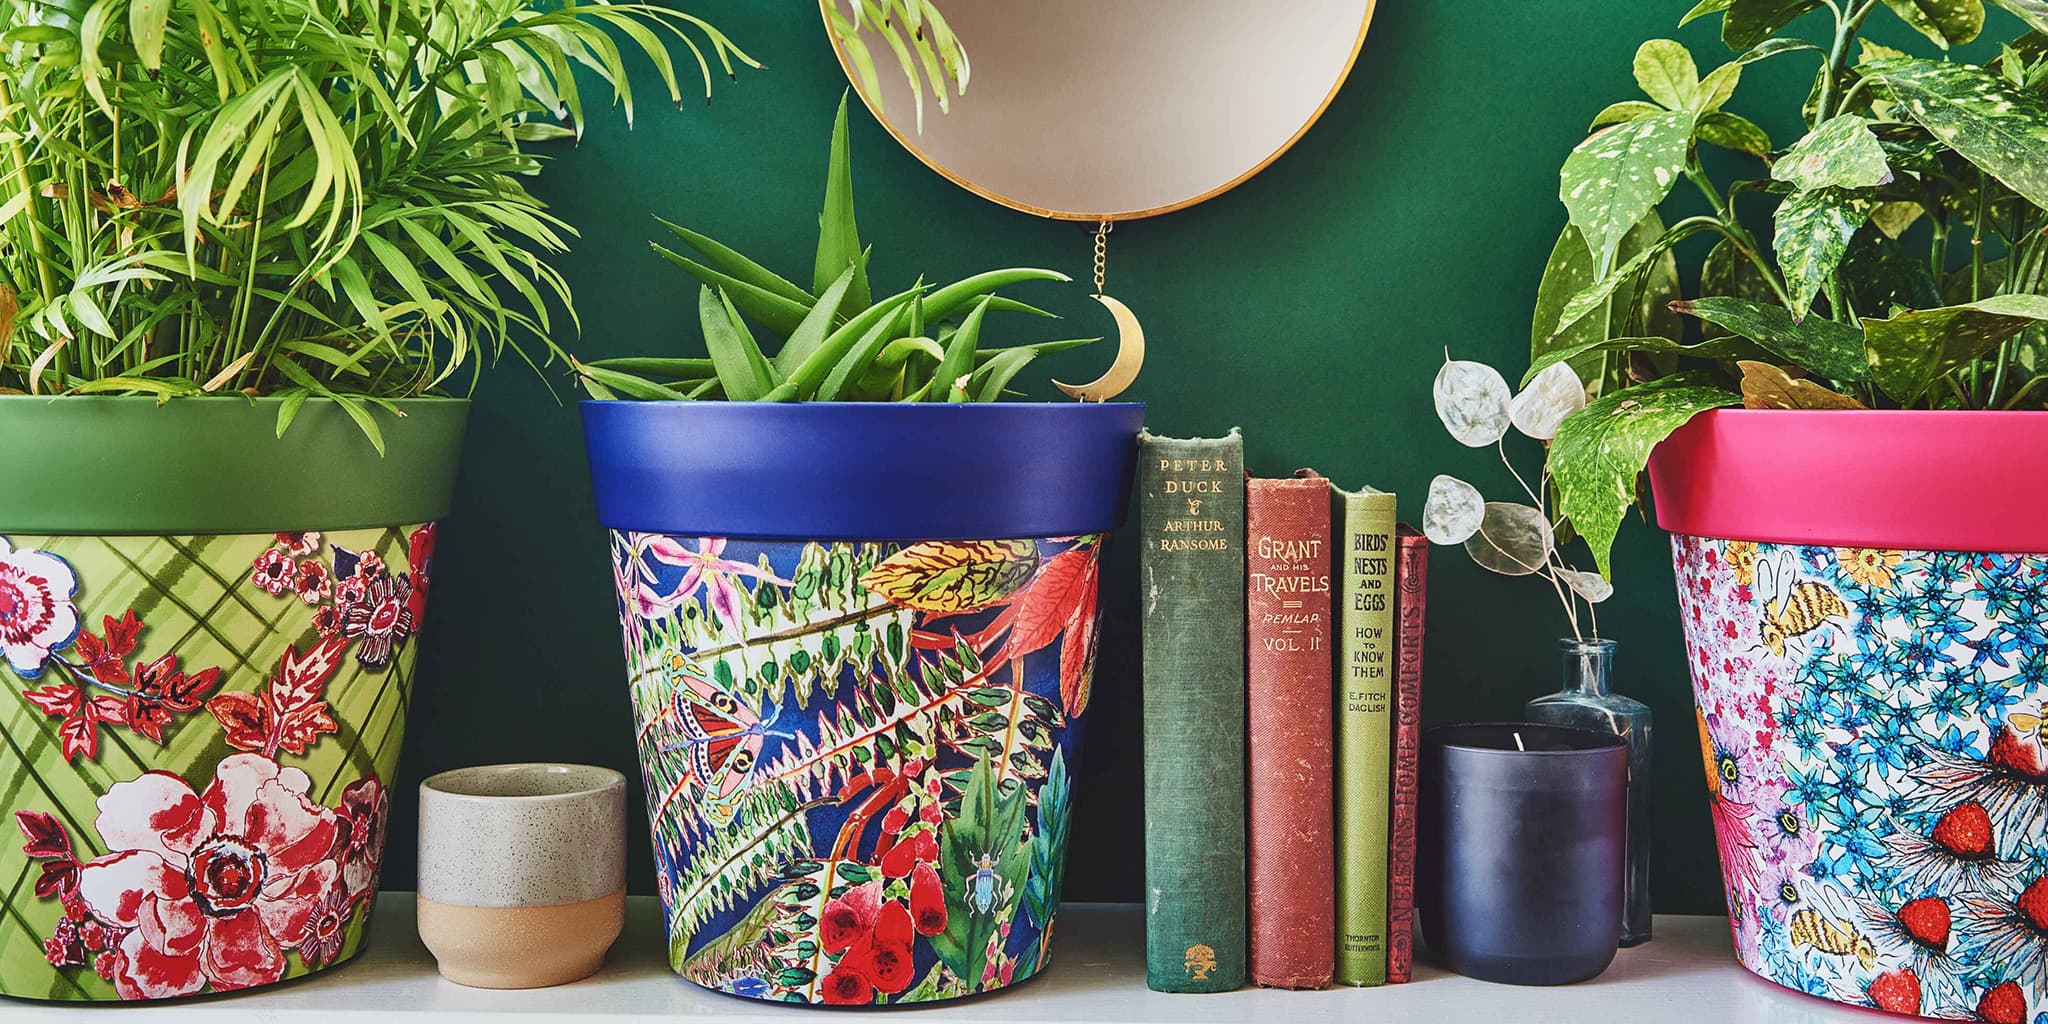 Hum Flowerpots in bright colours and floral designs with plants